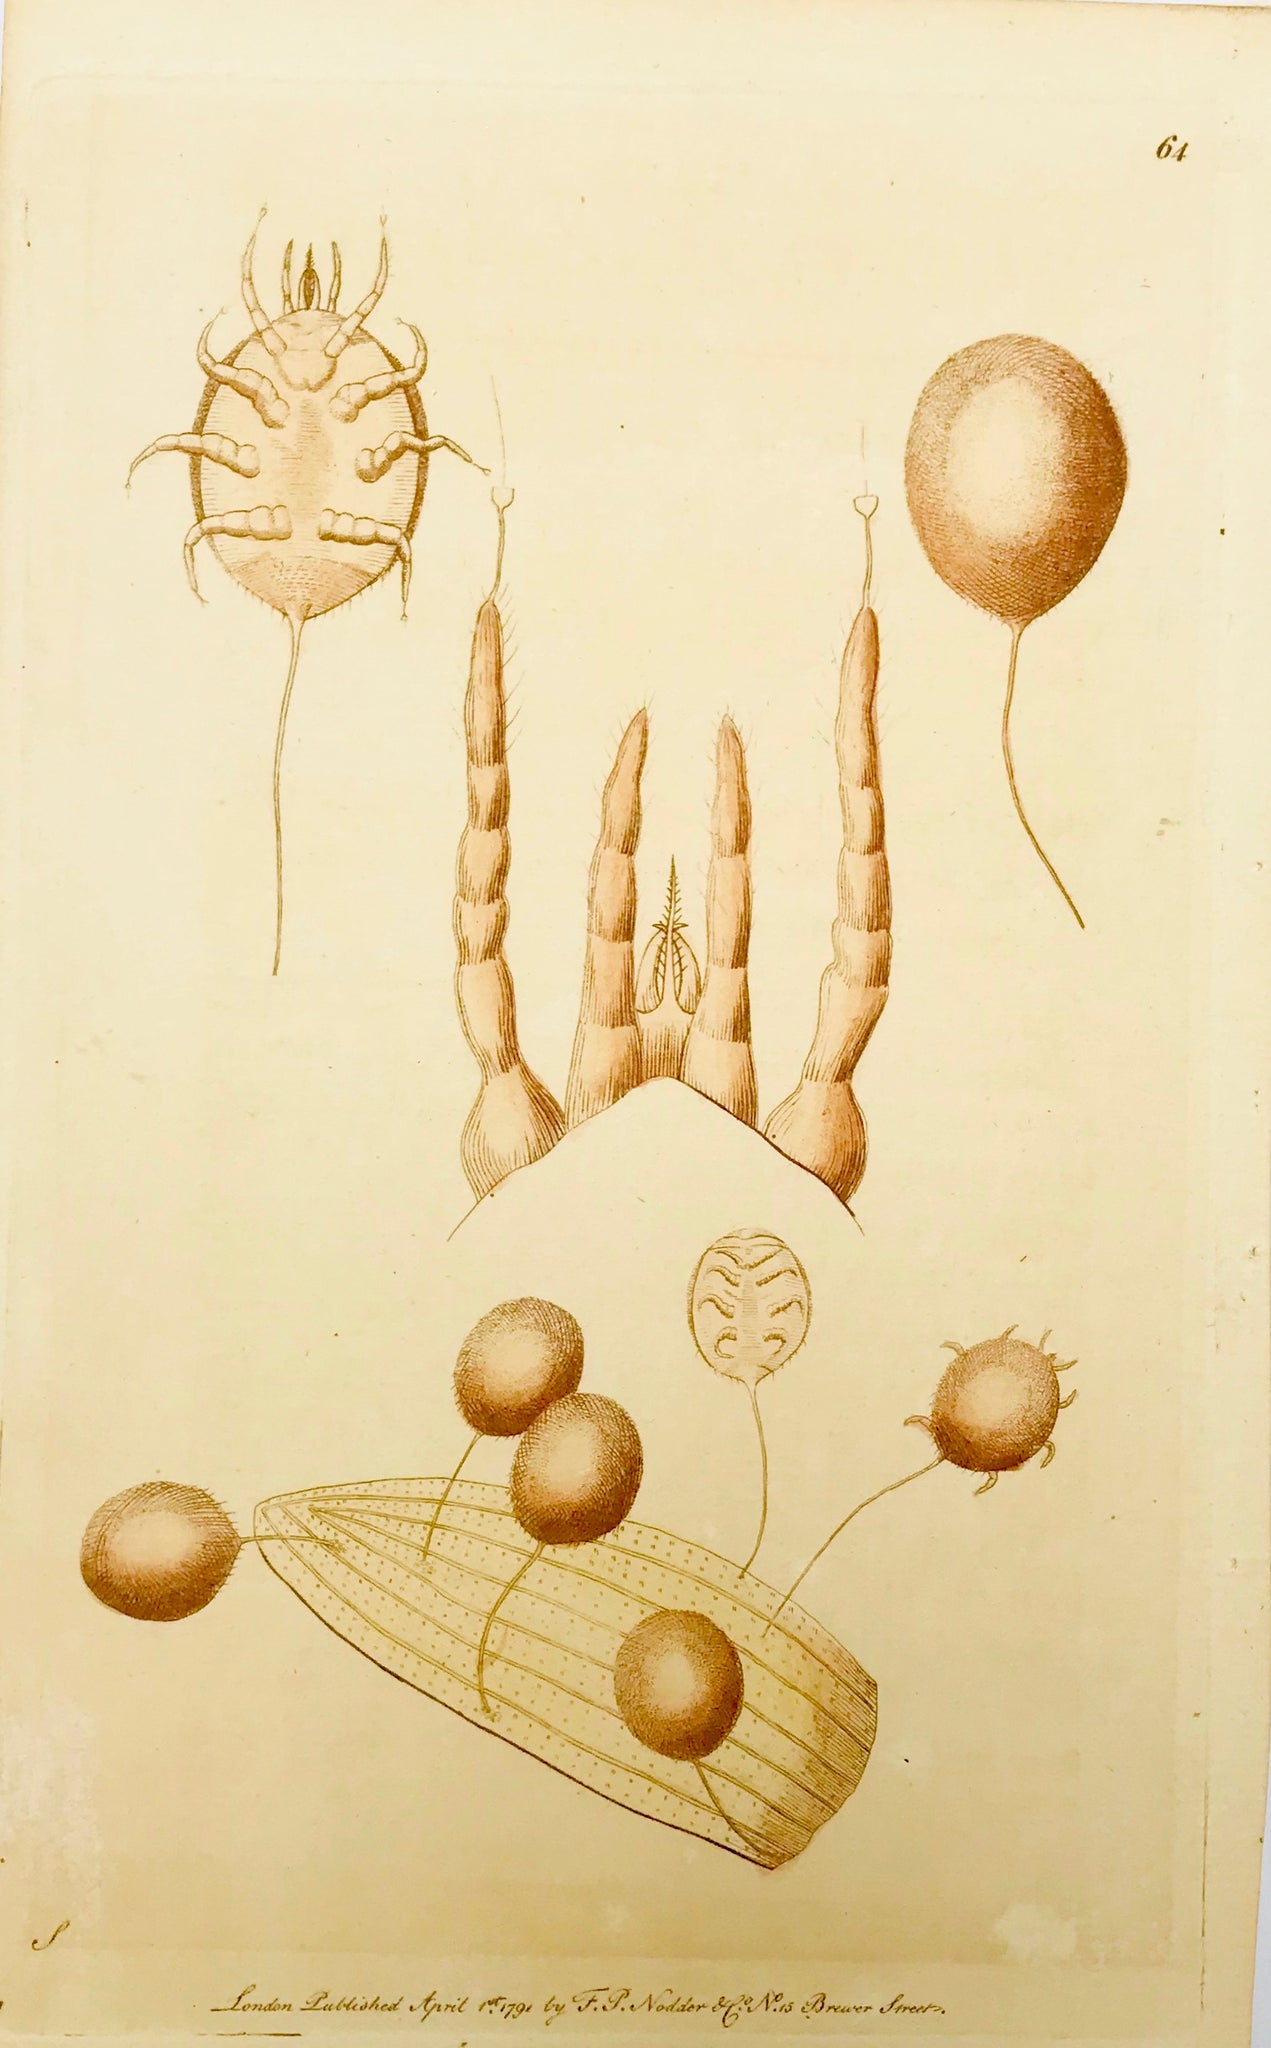 No title (Tick - Zecke - Acari - Ixodida)  Toned lithograph dated 1791. Published by Nodder in London. Minor signs of age.